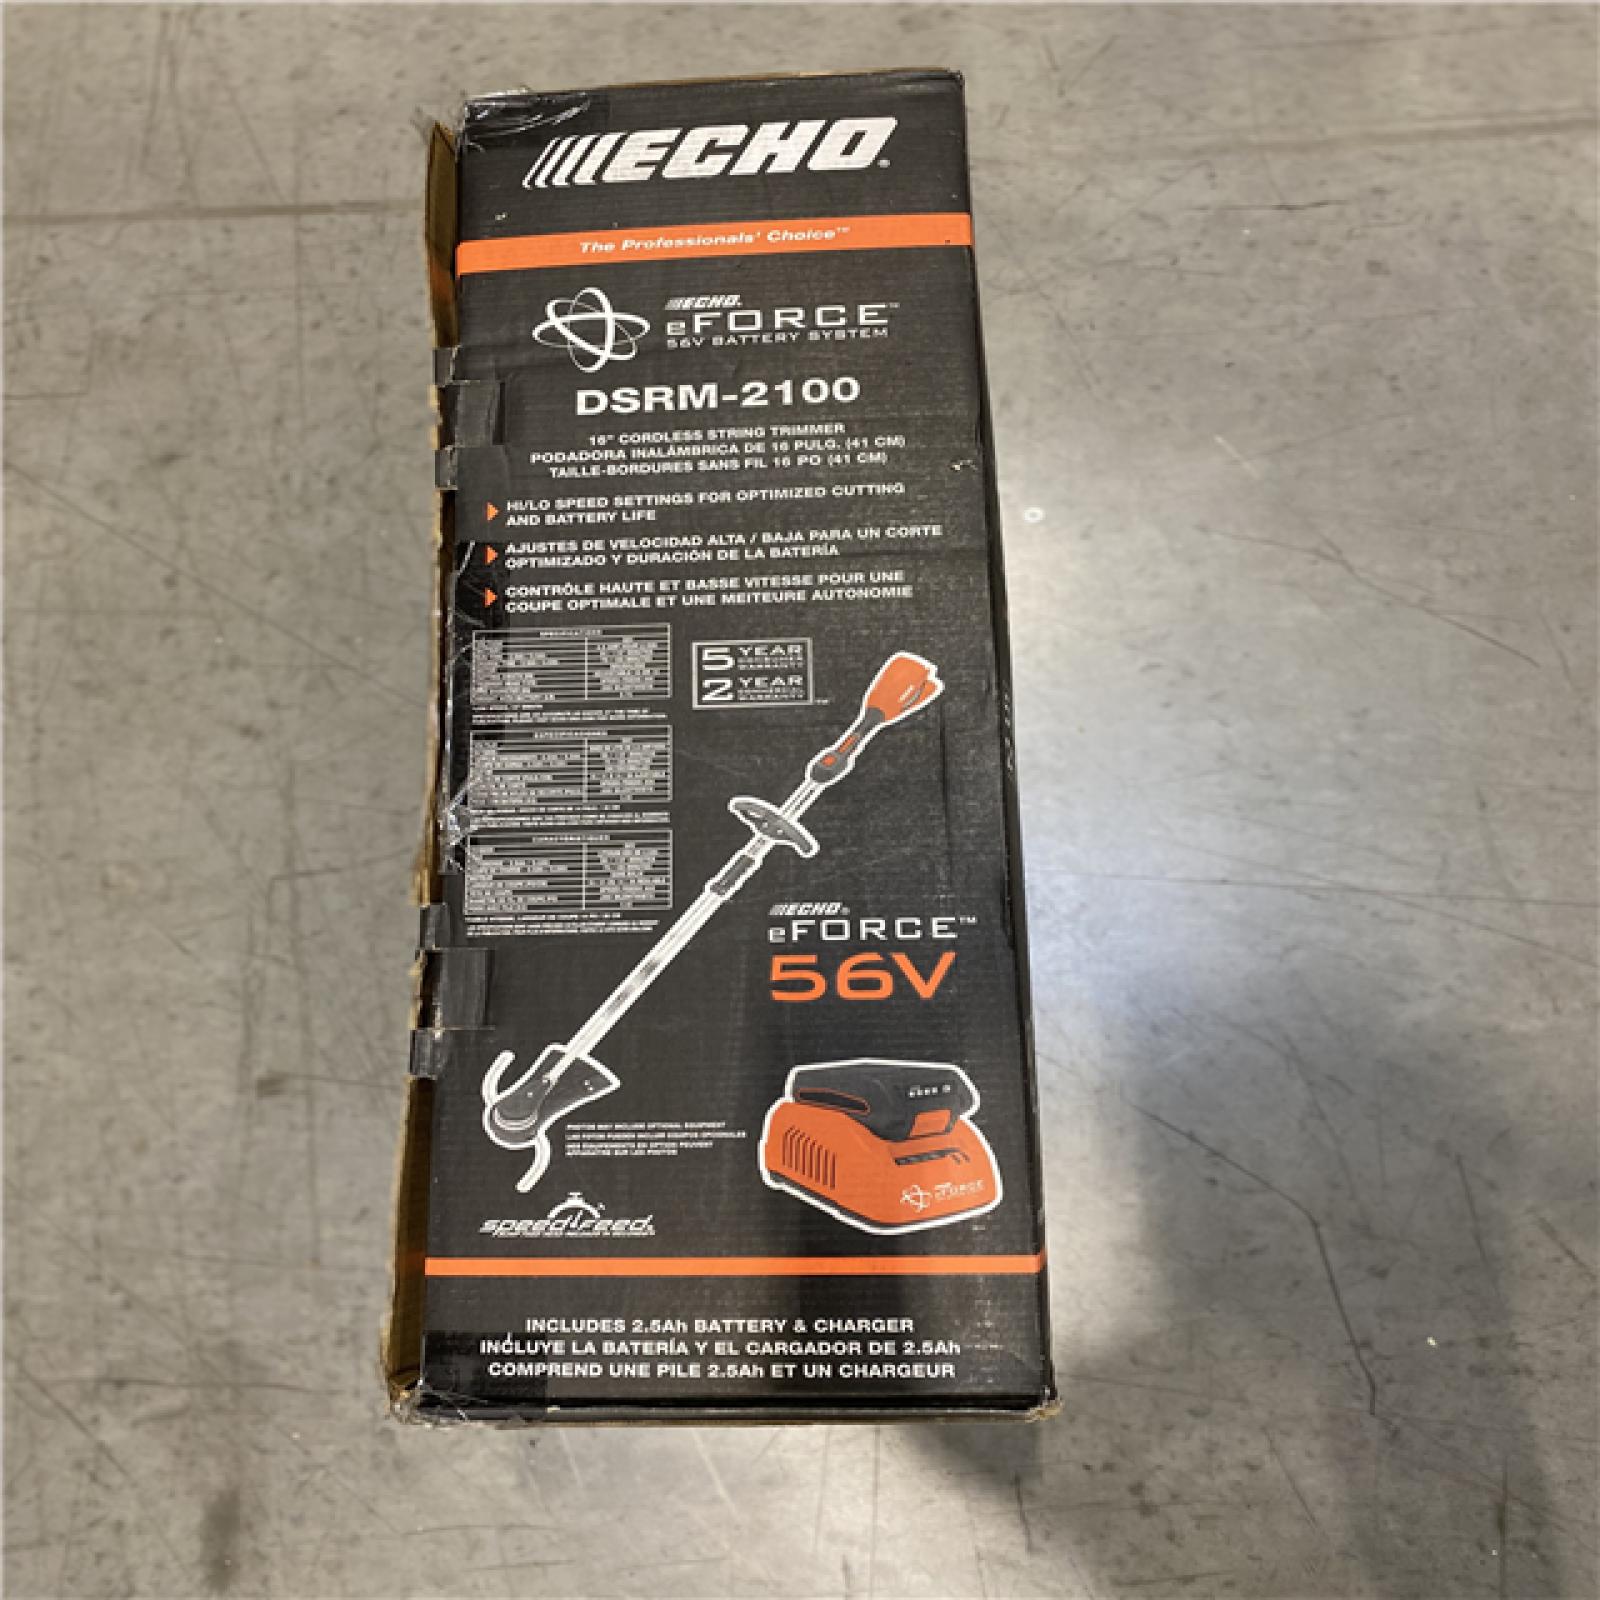 ECHO eFORCE 56V 16 in. Brushless Cordless Battery String Trimmer with 2.5Ah Battery and Charger